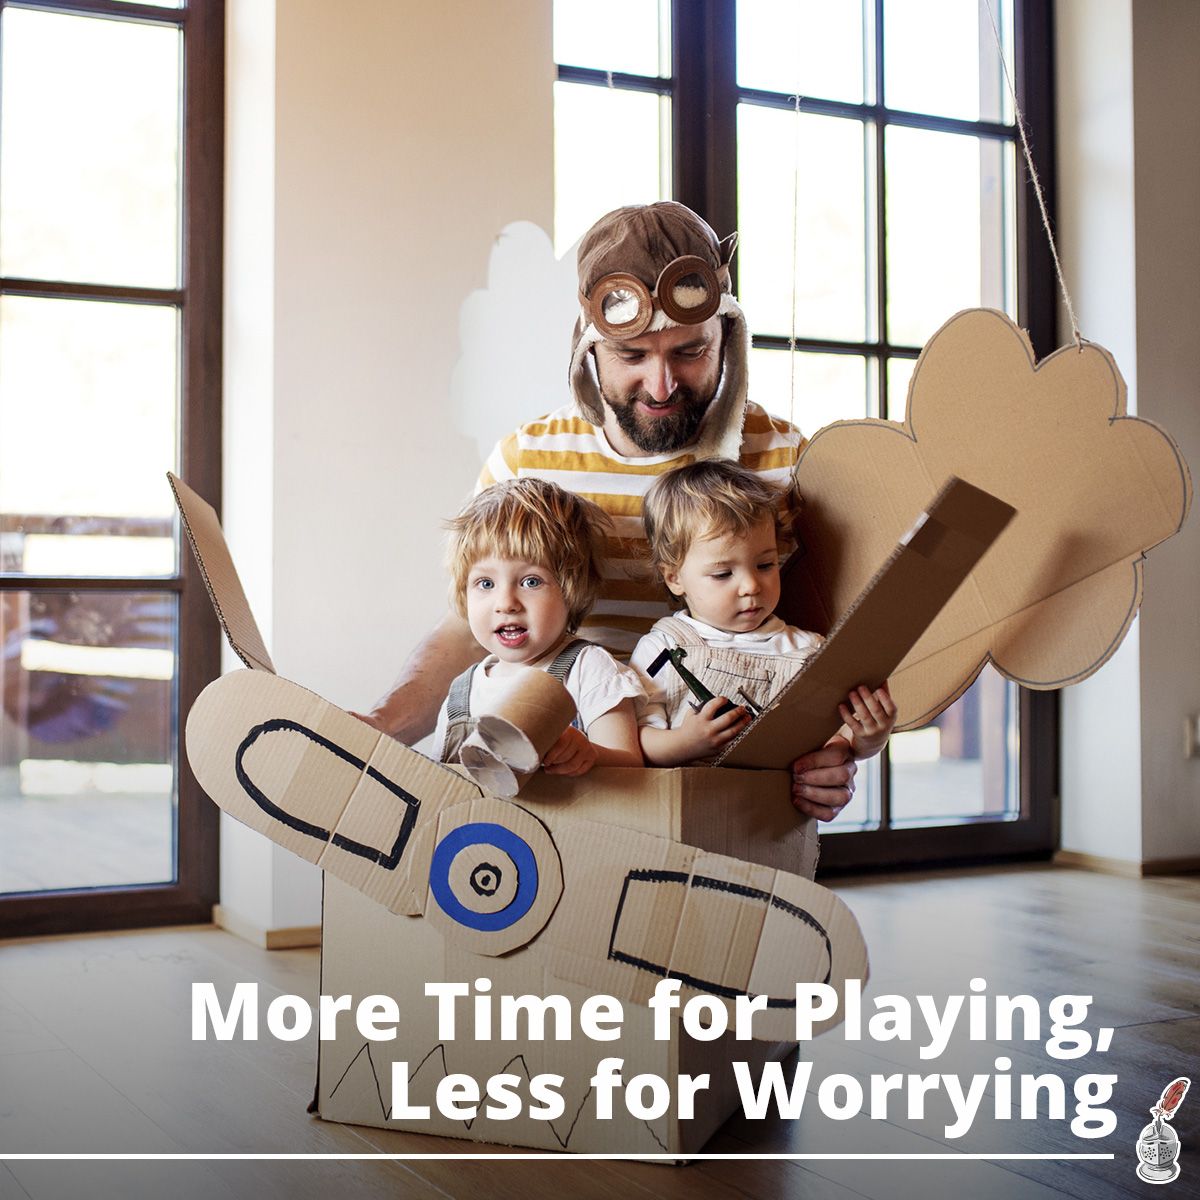 More Time for Playing, Less for Worrying